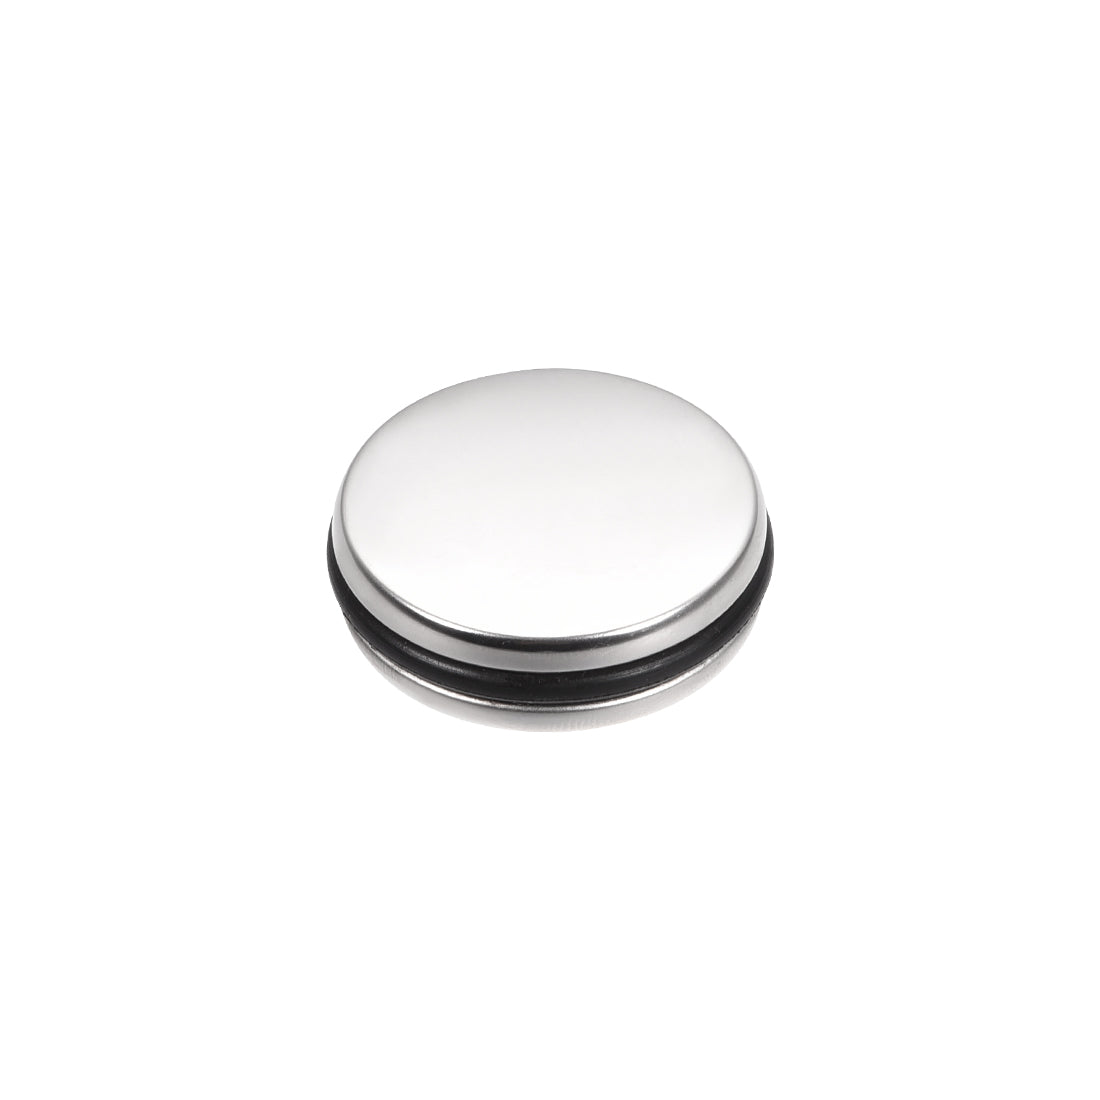 Uxcell Uxcell Basin Sink Plug Stopper Stainless Steel 35mm Diameter Drain Stopper